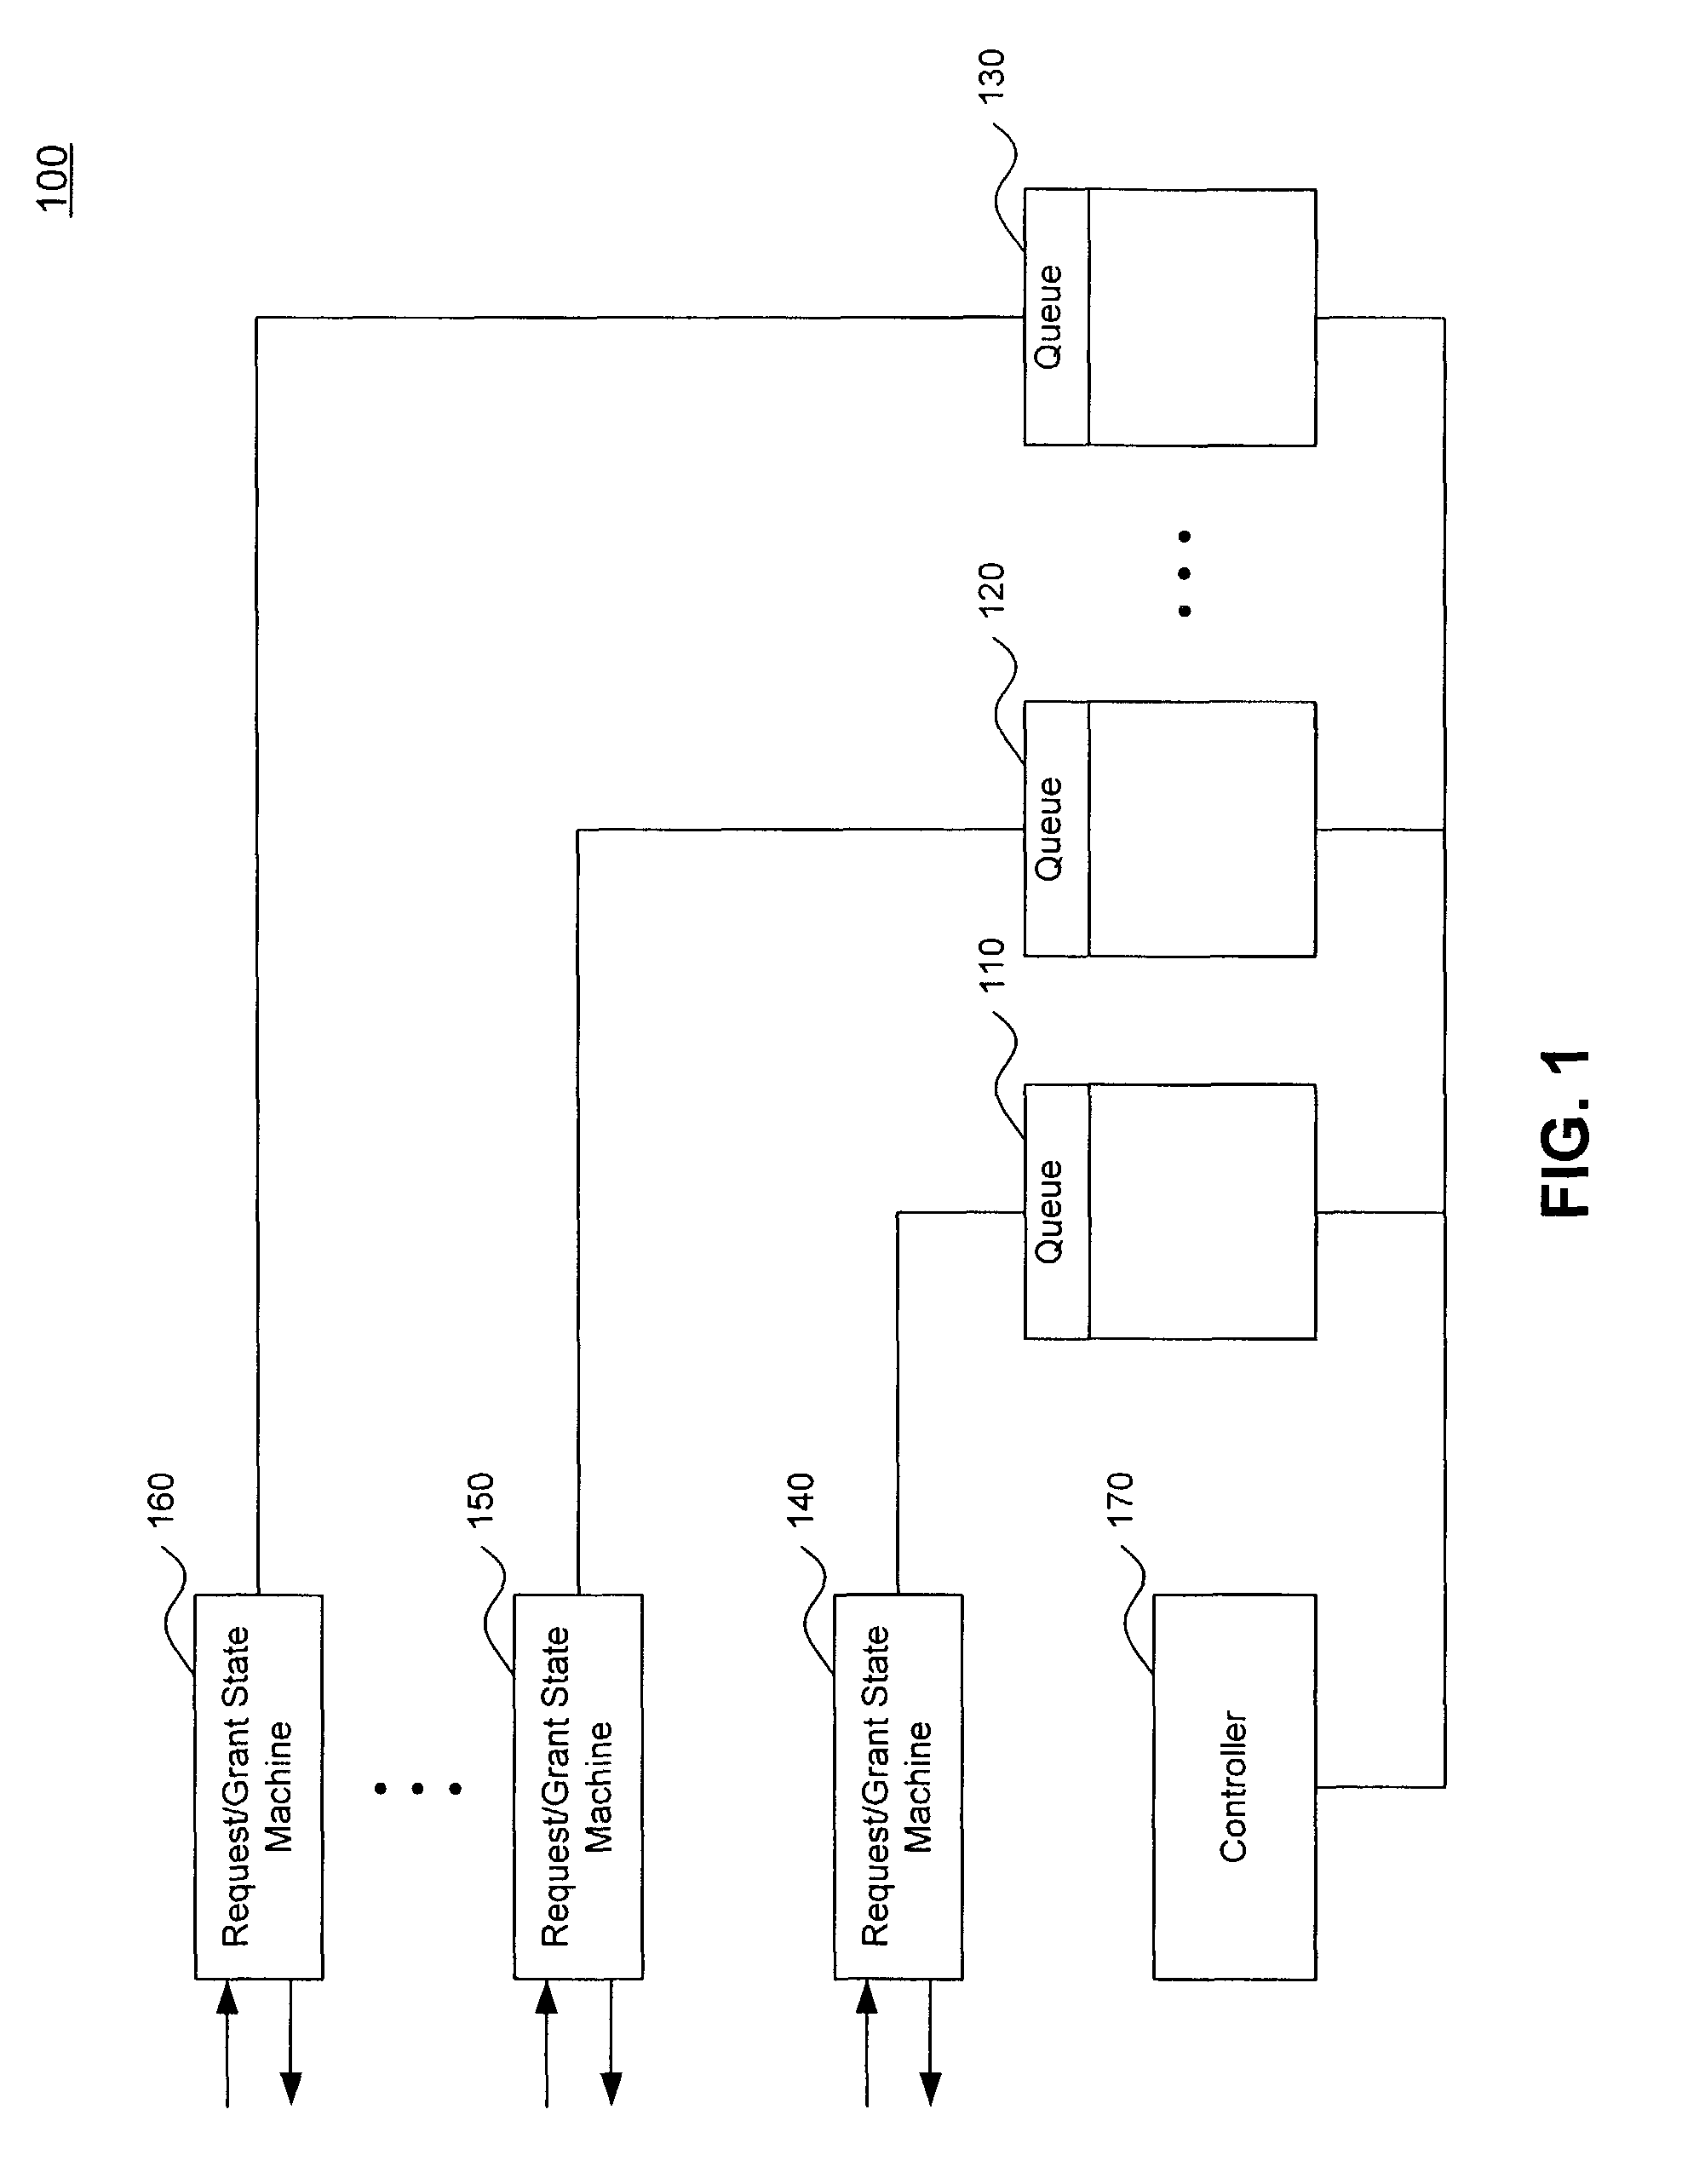 System and method for preferred service flow of high priority messages